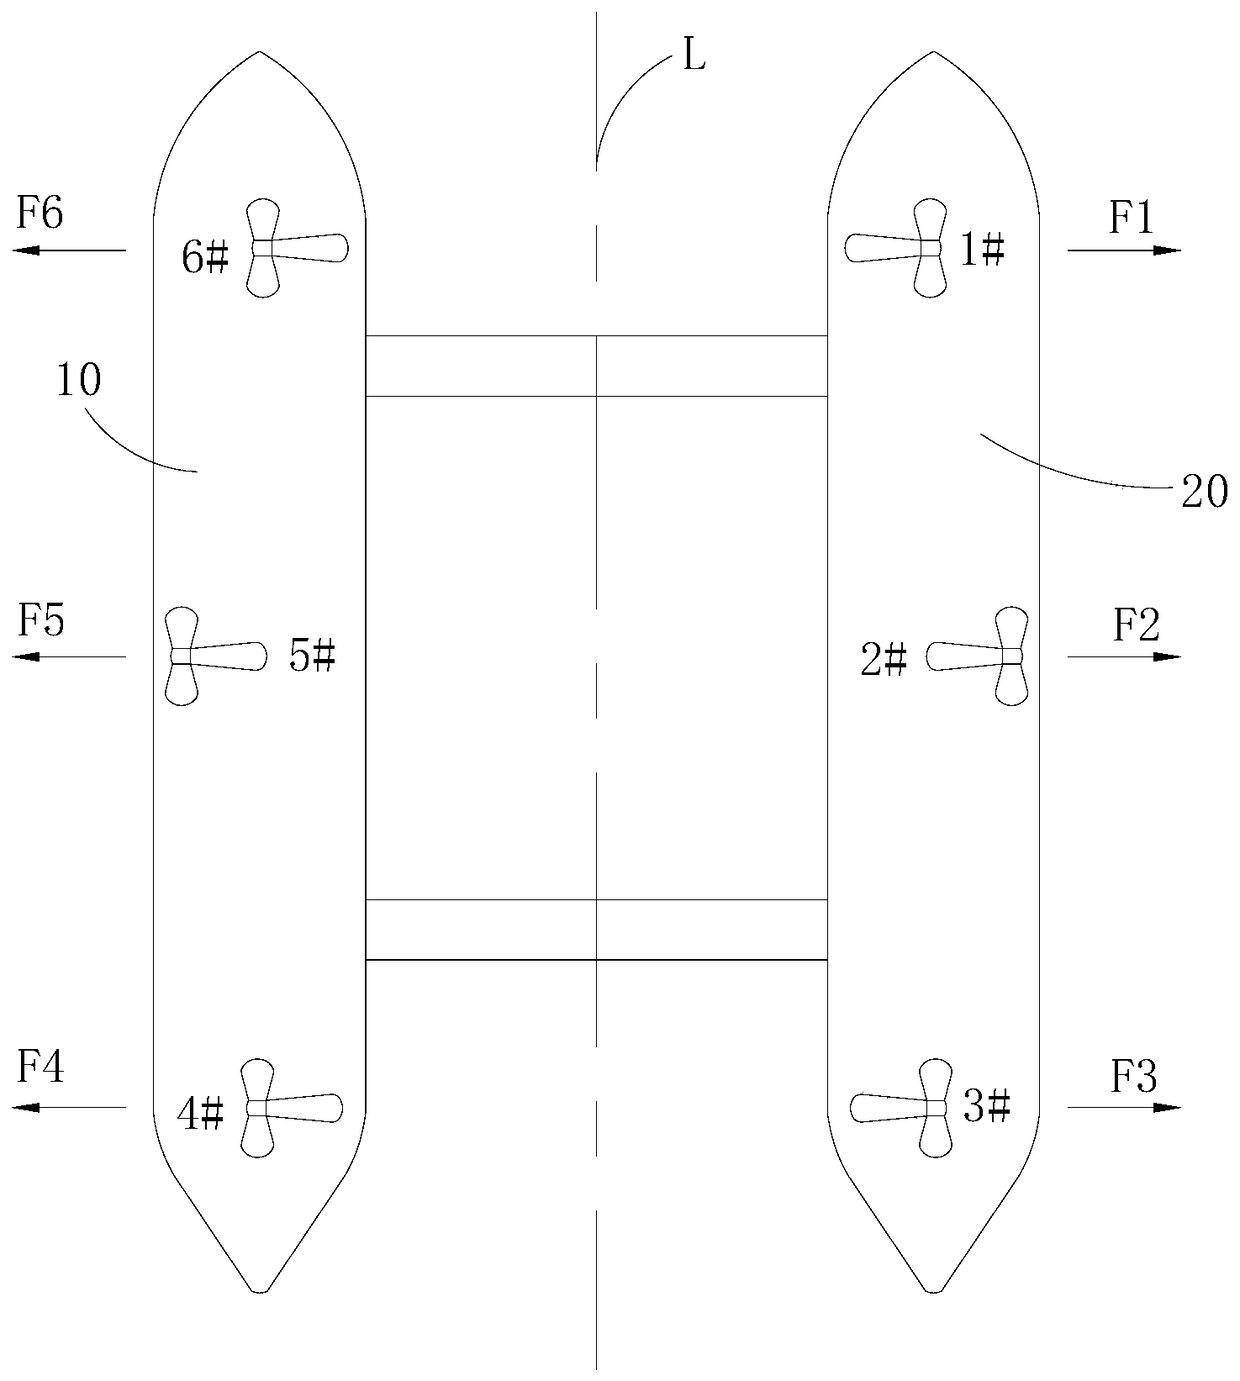 Thrust test method for thrusters of dynamically positioned semi-submersible offshore platforms